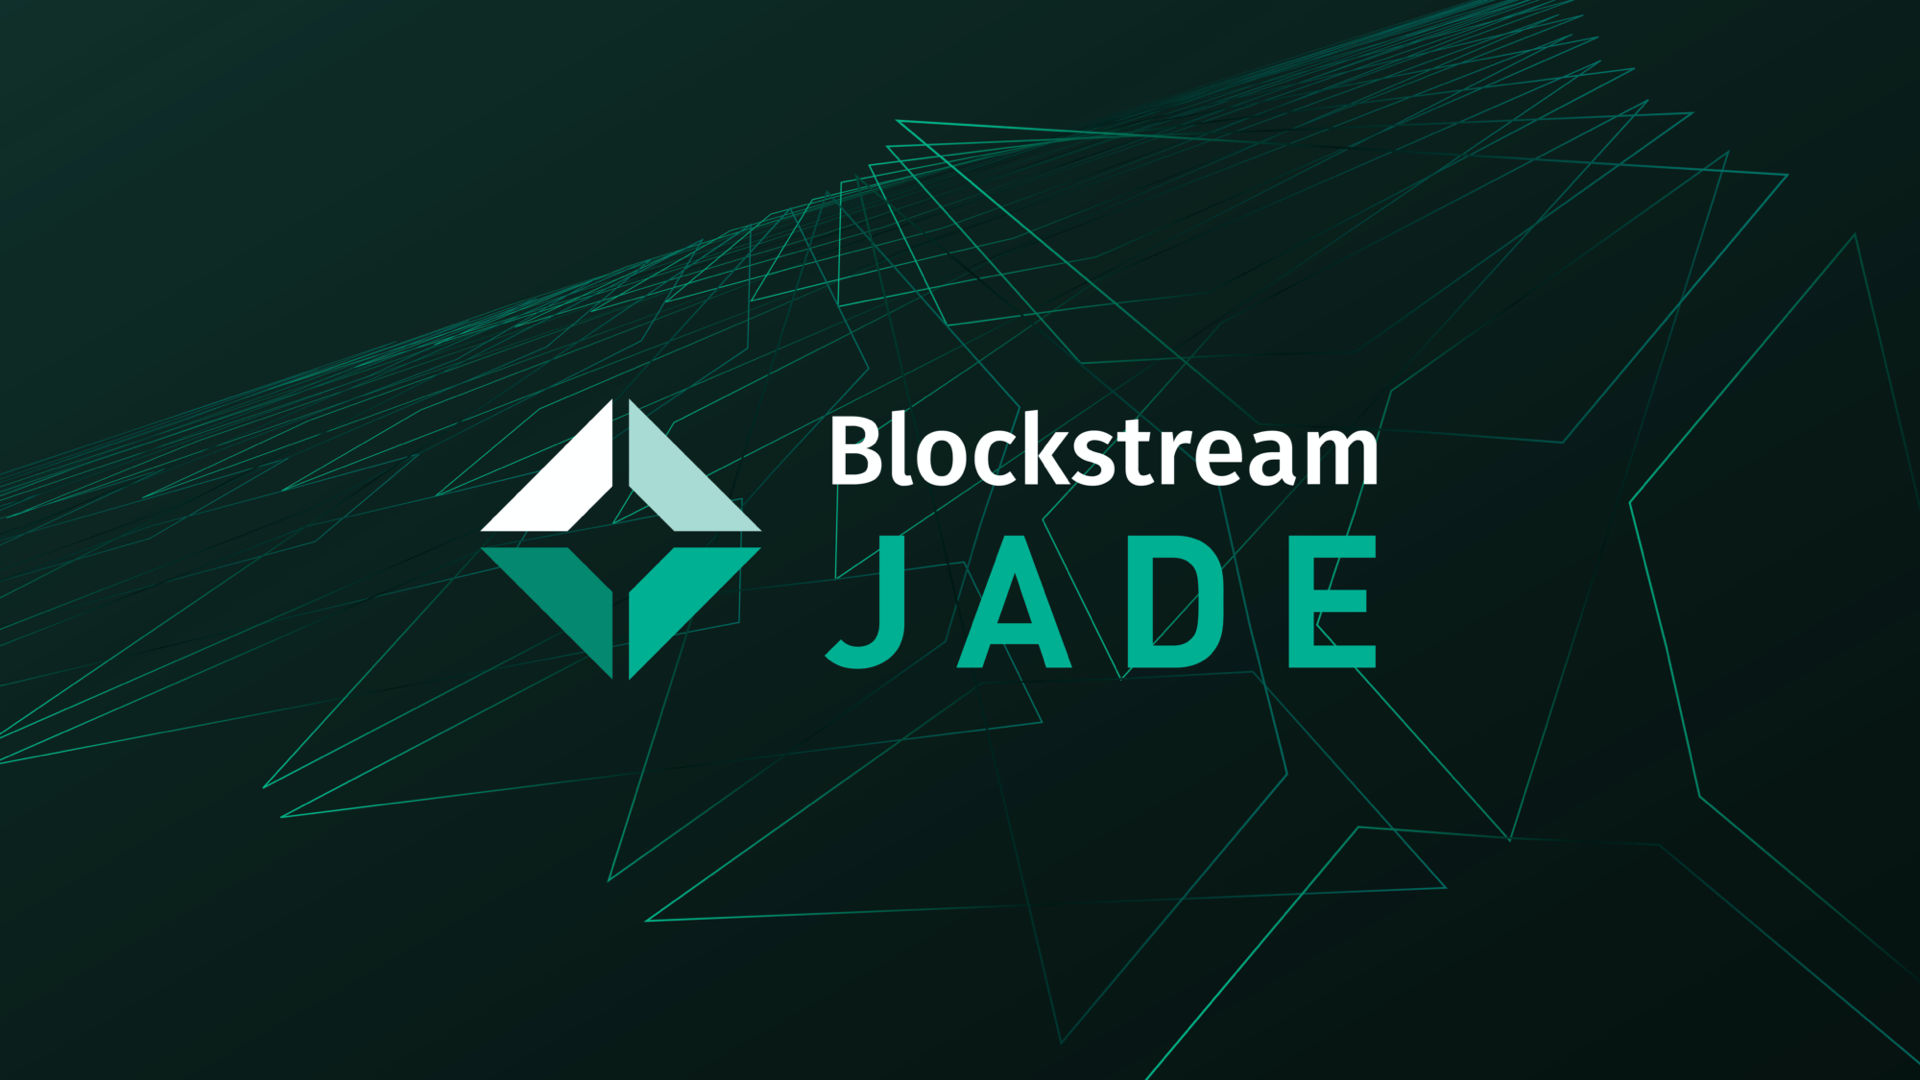 Secure Your Bitcoin and Liquid Assets With the New Blockstream Jade Hardware Wallet